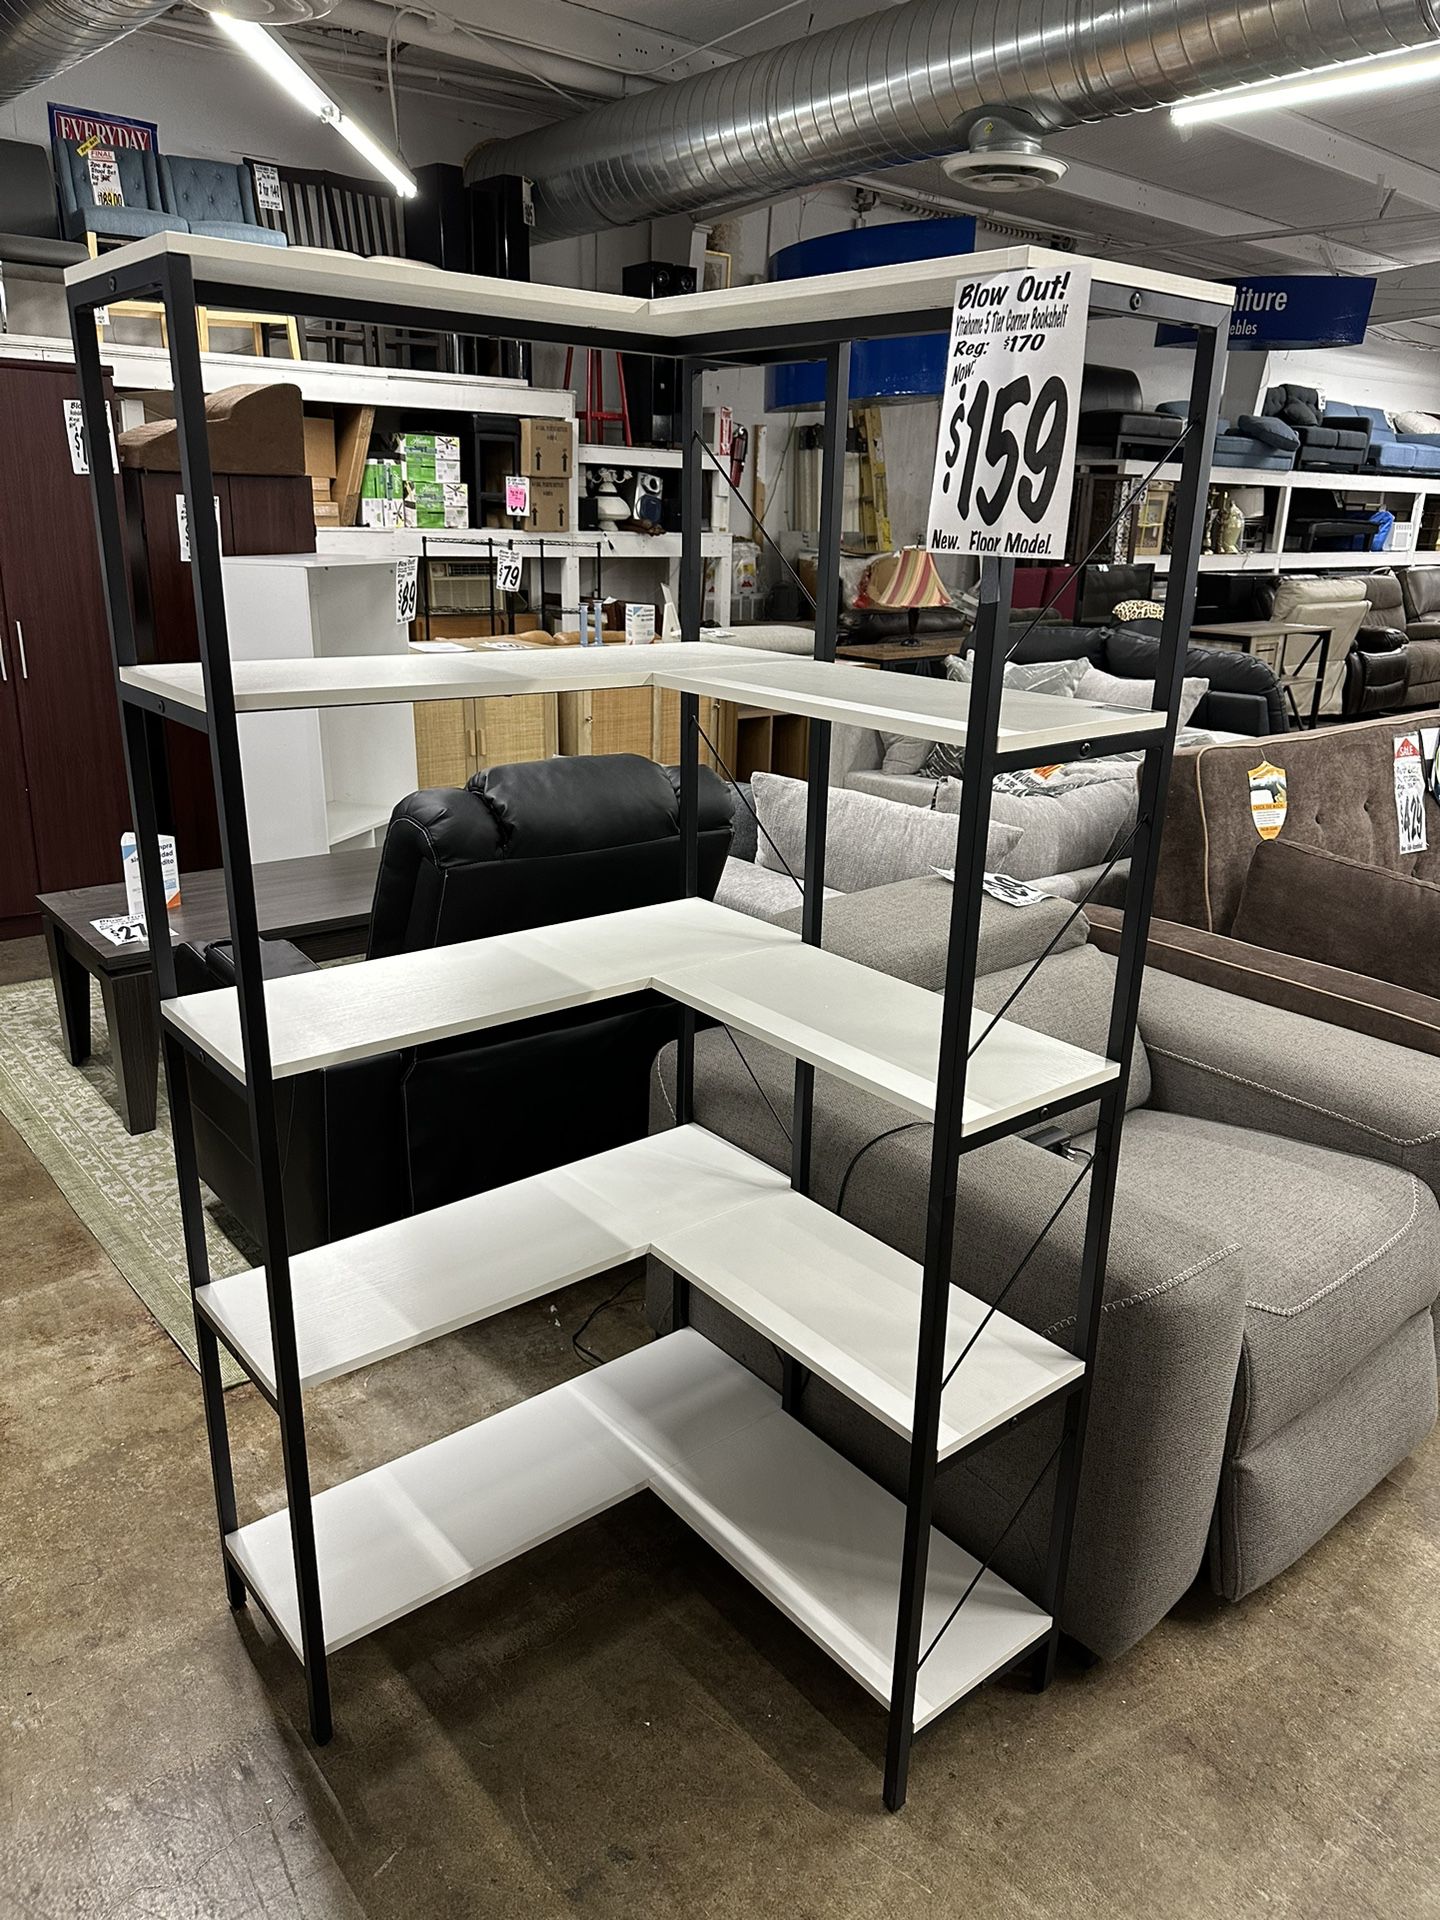 SALE!  BRAND NEW 5-Tier Corner Shelf!  Perfect for Pantry or Books (Reg. $170)  Plus ASSEMBLED FREE!!  11.8"D x 31.5"W x 65.9"H